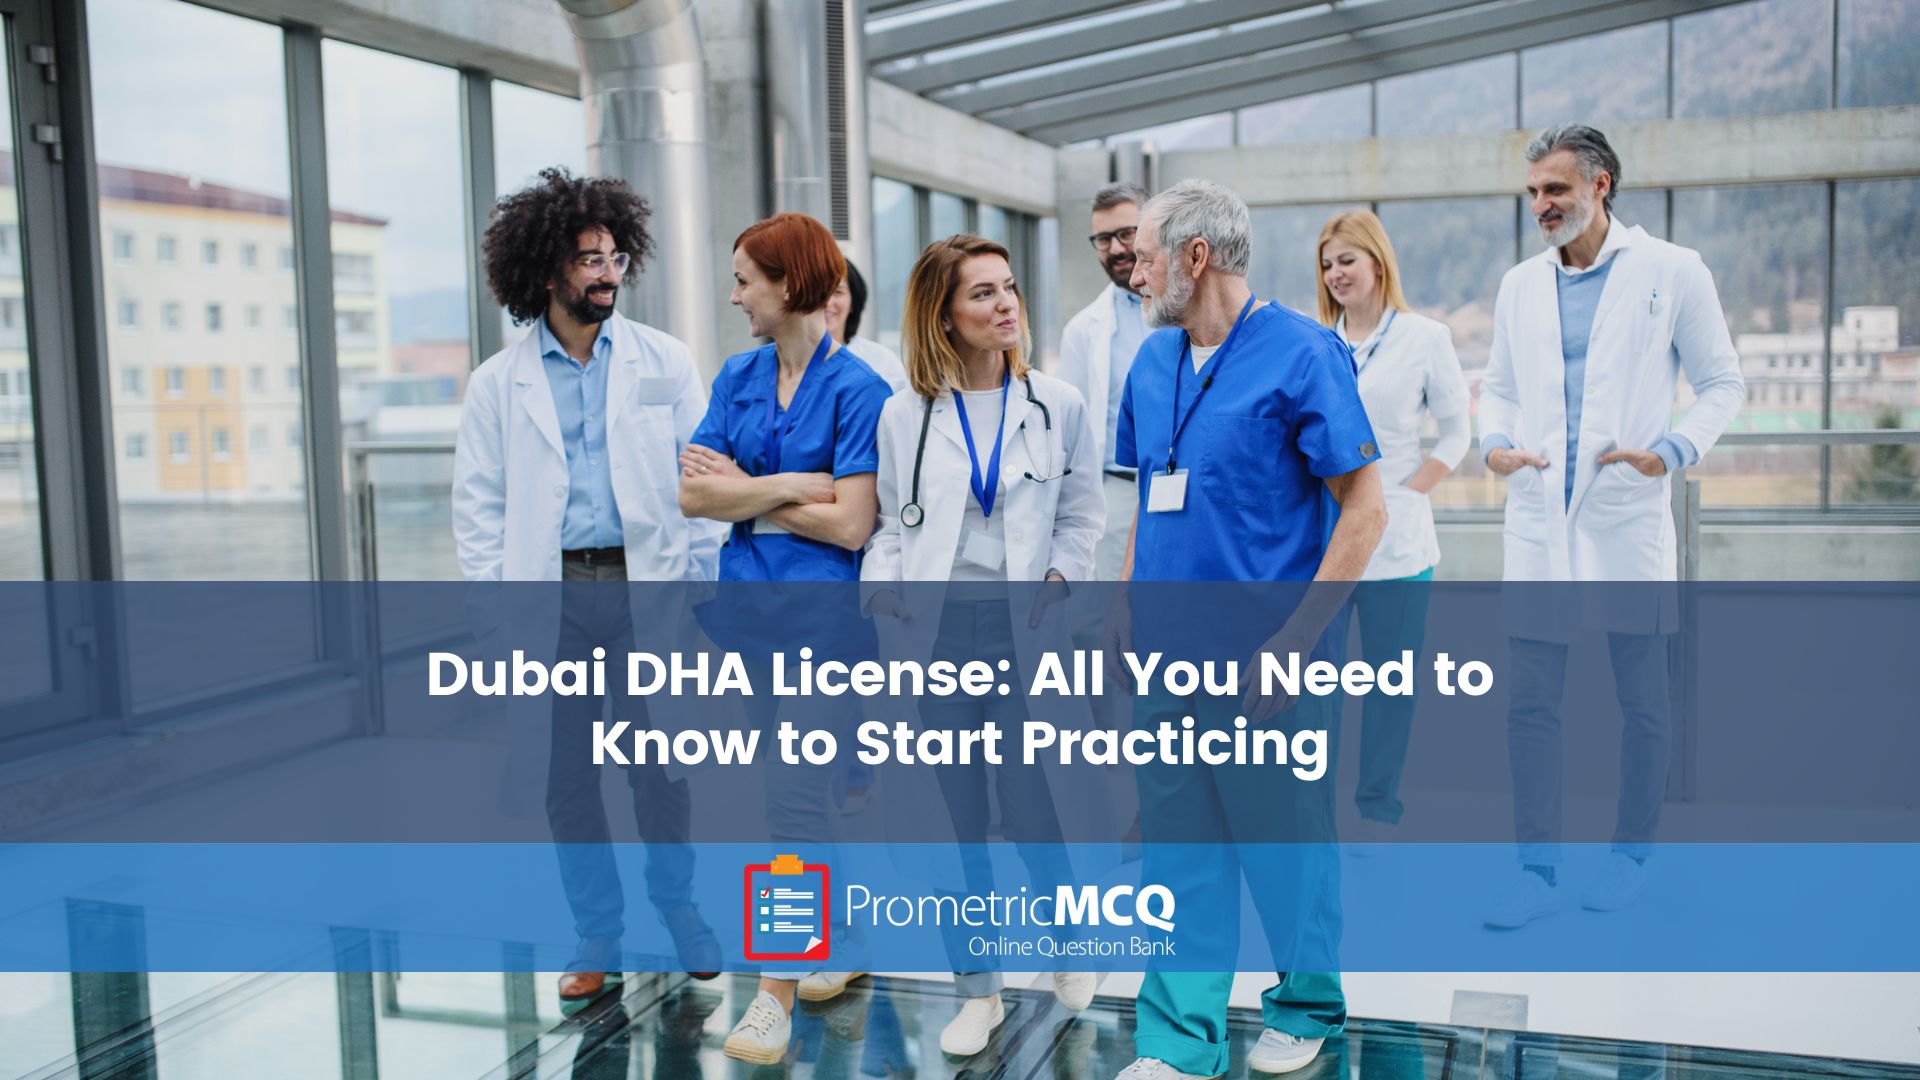 Dubai DHA License: All You Need to Know to Start Practicing